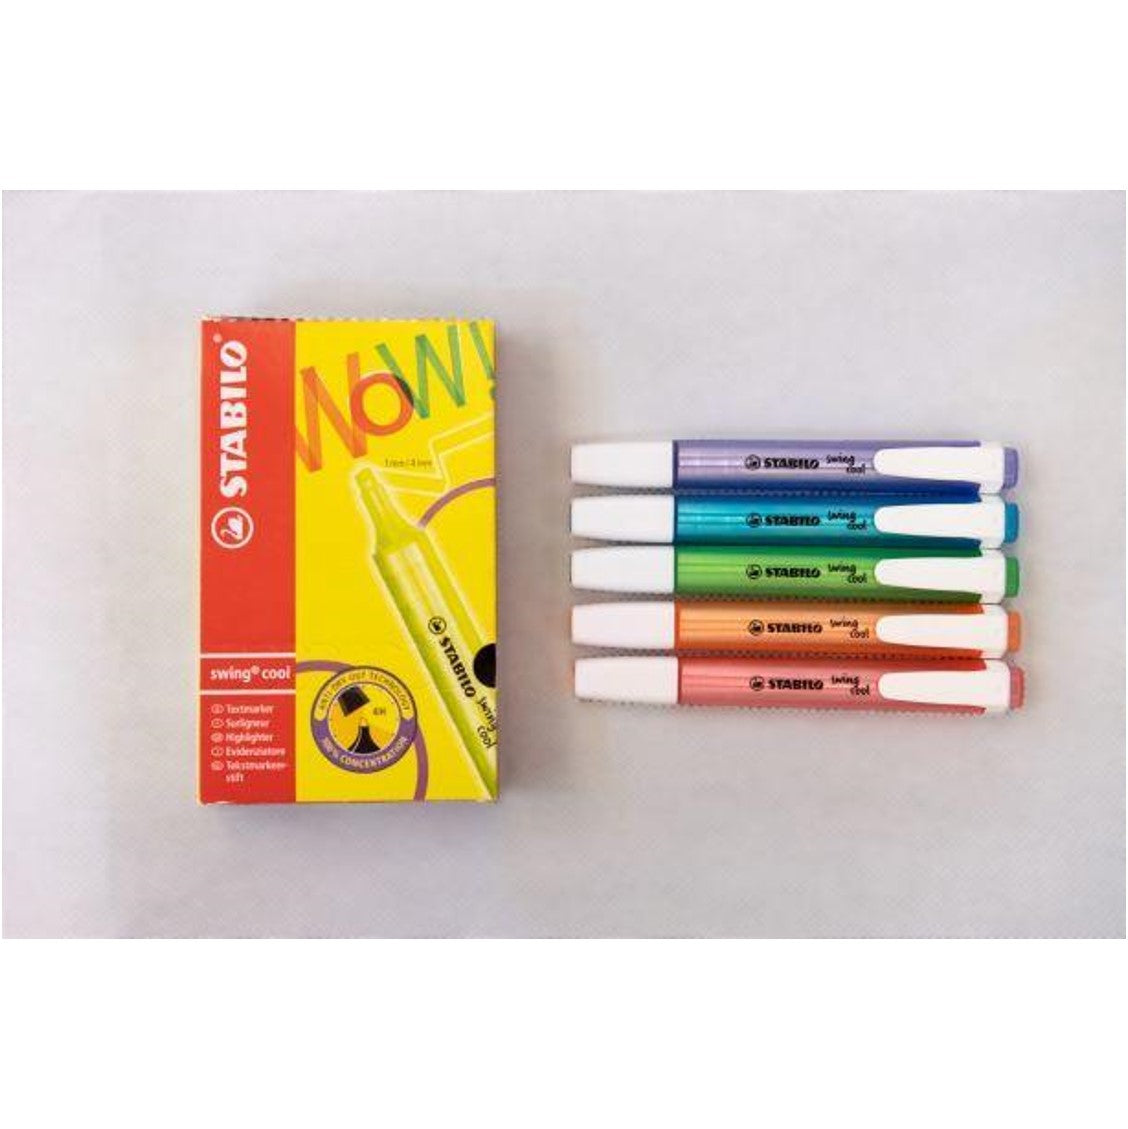 STABILO Swing Cool Highlighter - Set of 6 - Schwan-STABILO -Most colourful  Stationery Shop